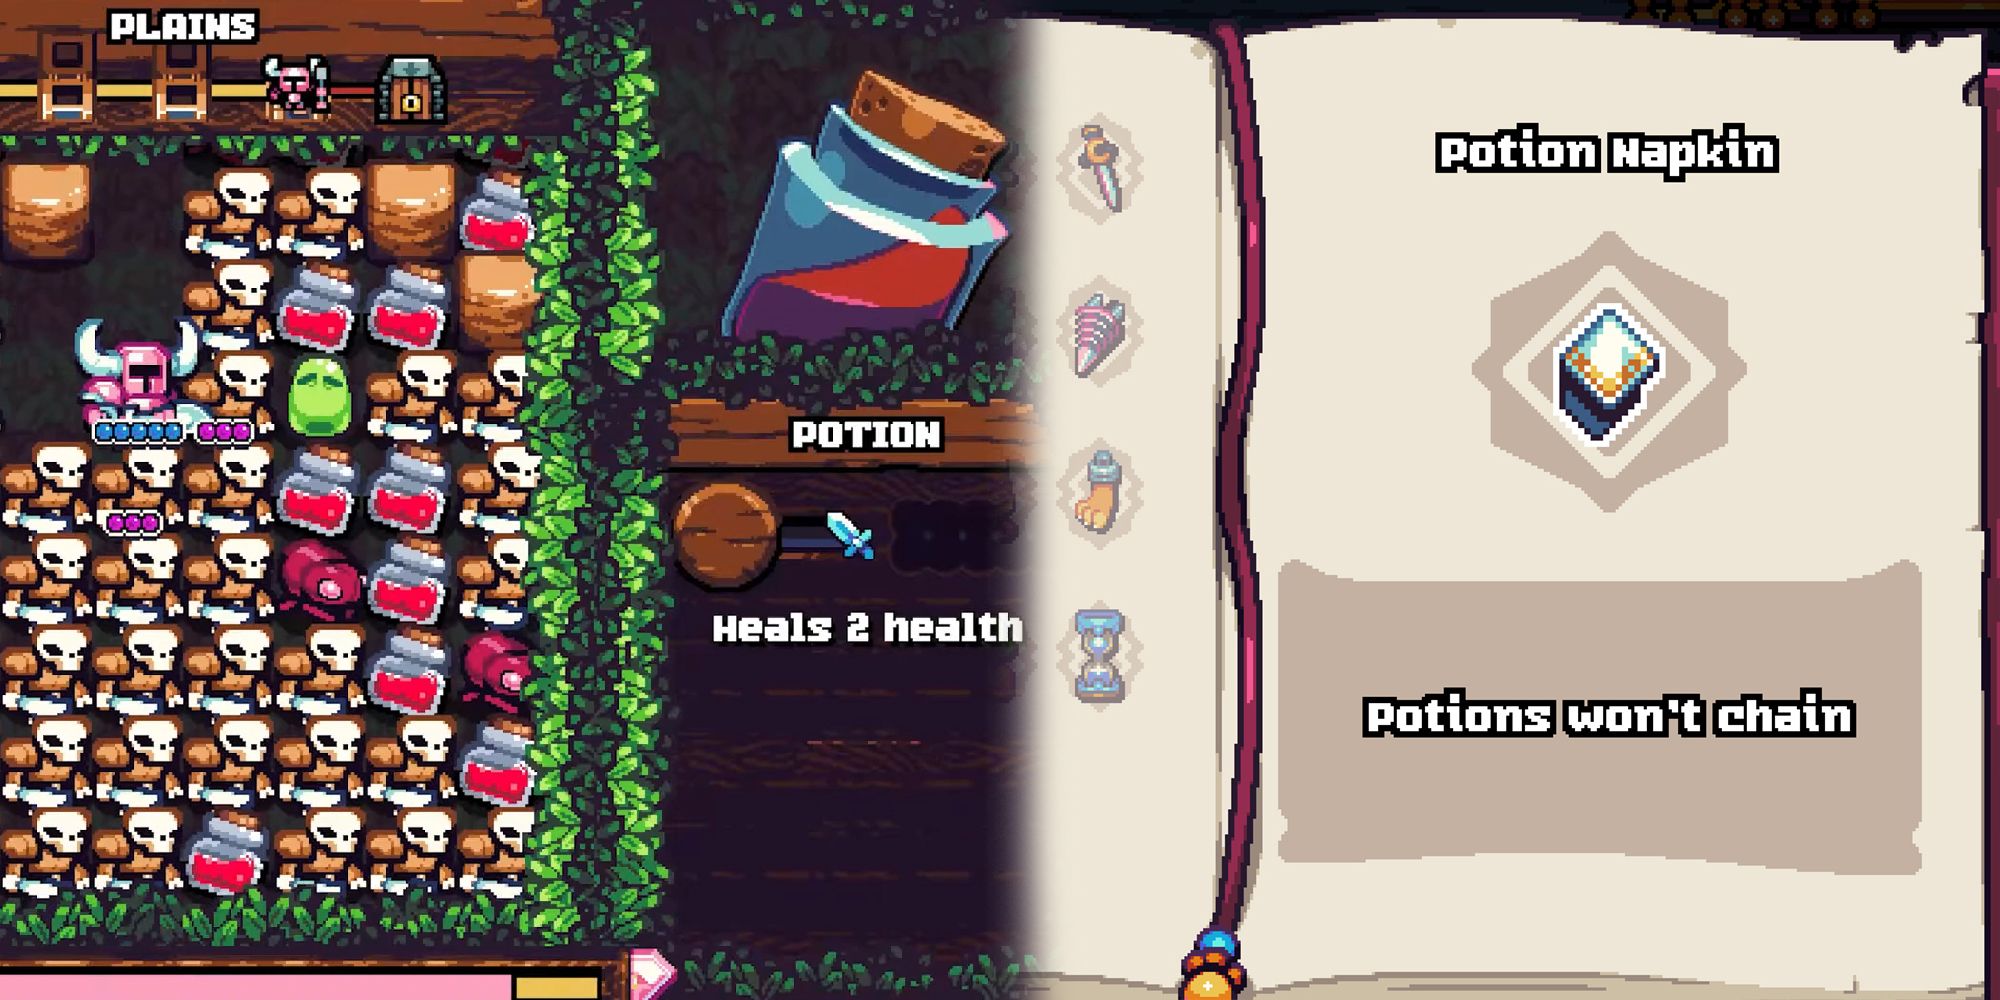 Shovel Knight Pocket Dungeon - The Potion Napkin Codex Entry With An Image Of Potions In Game Overlaid On Top